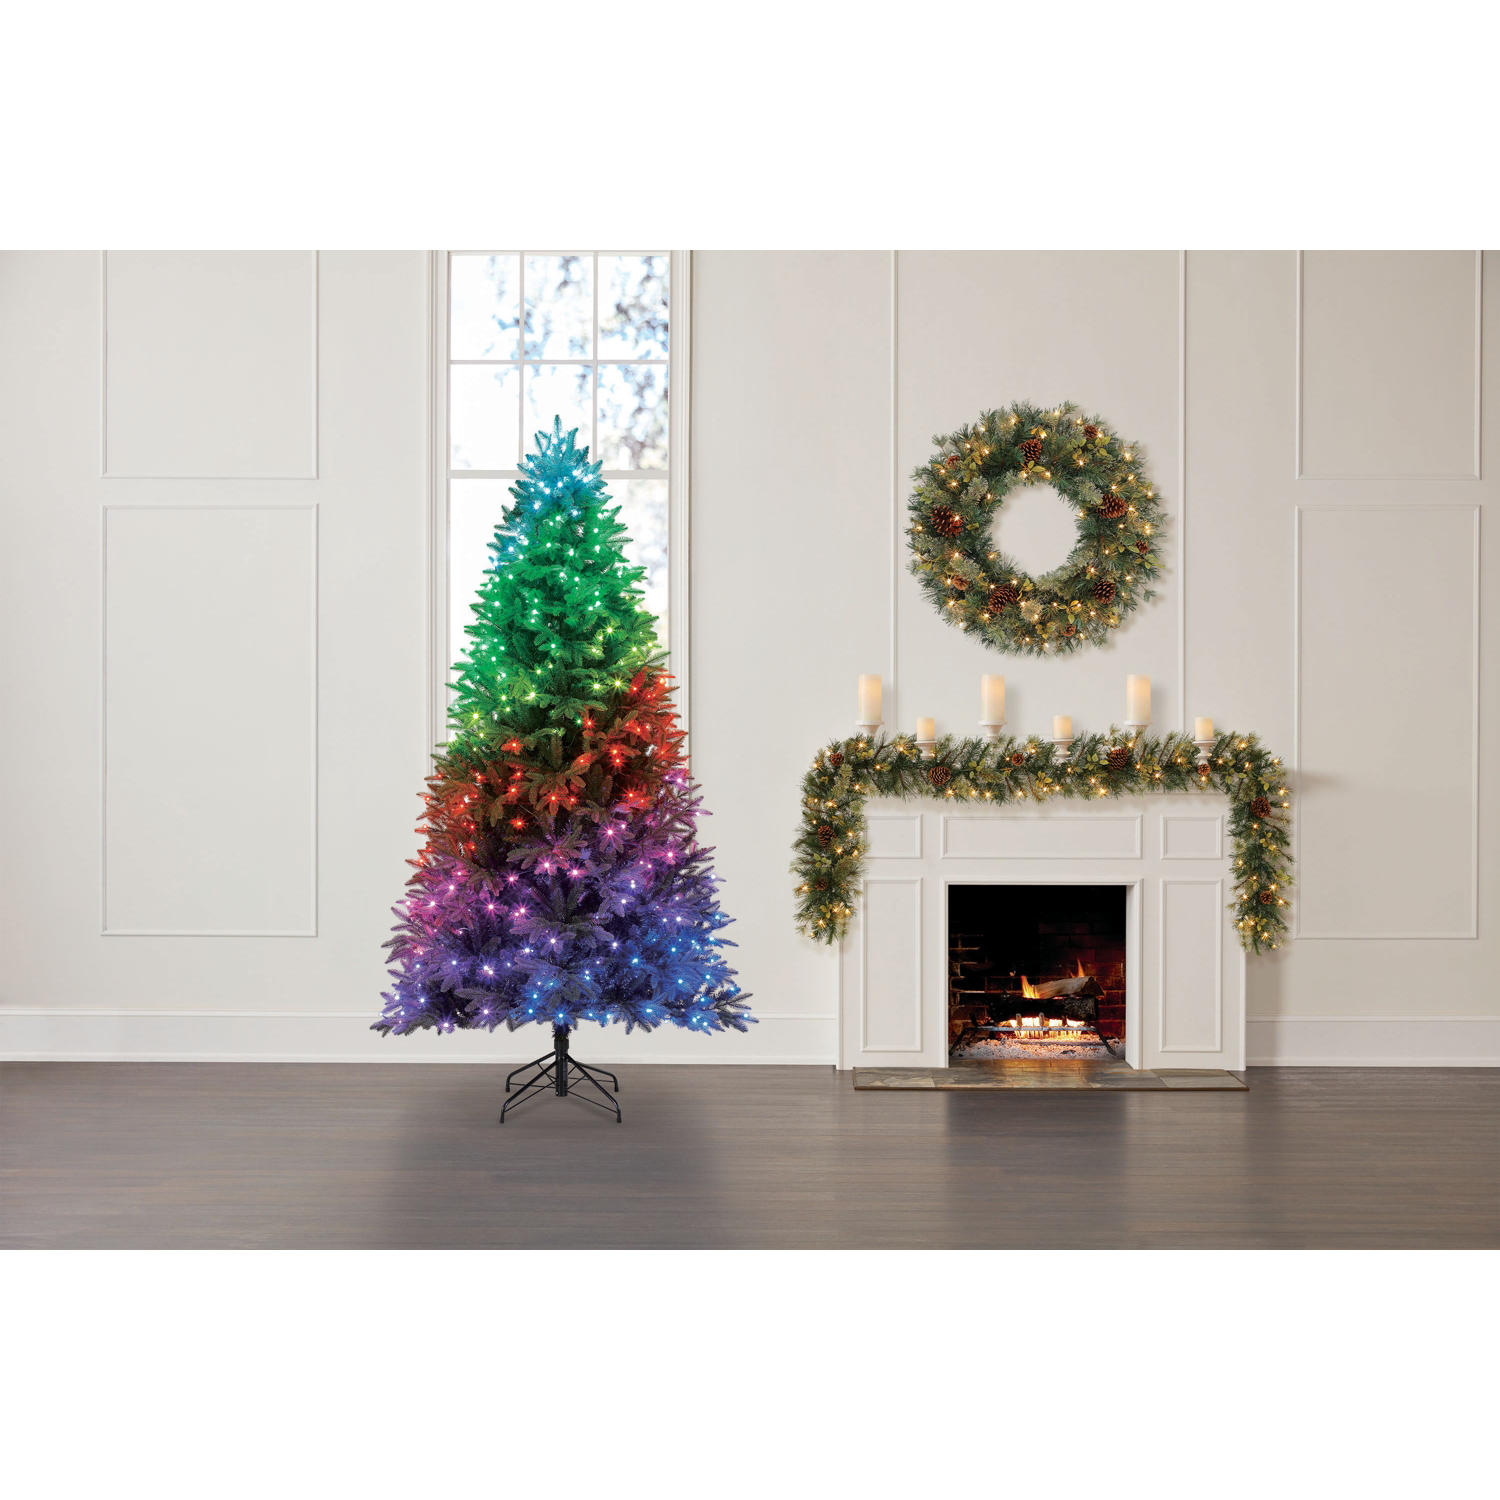 Member’s Mark Twinkly 7.5′ Smart App Programmable Color-Changing Christmas Tree